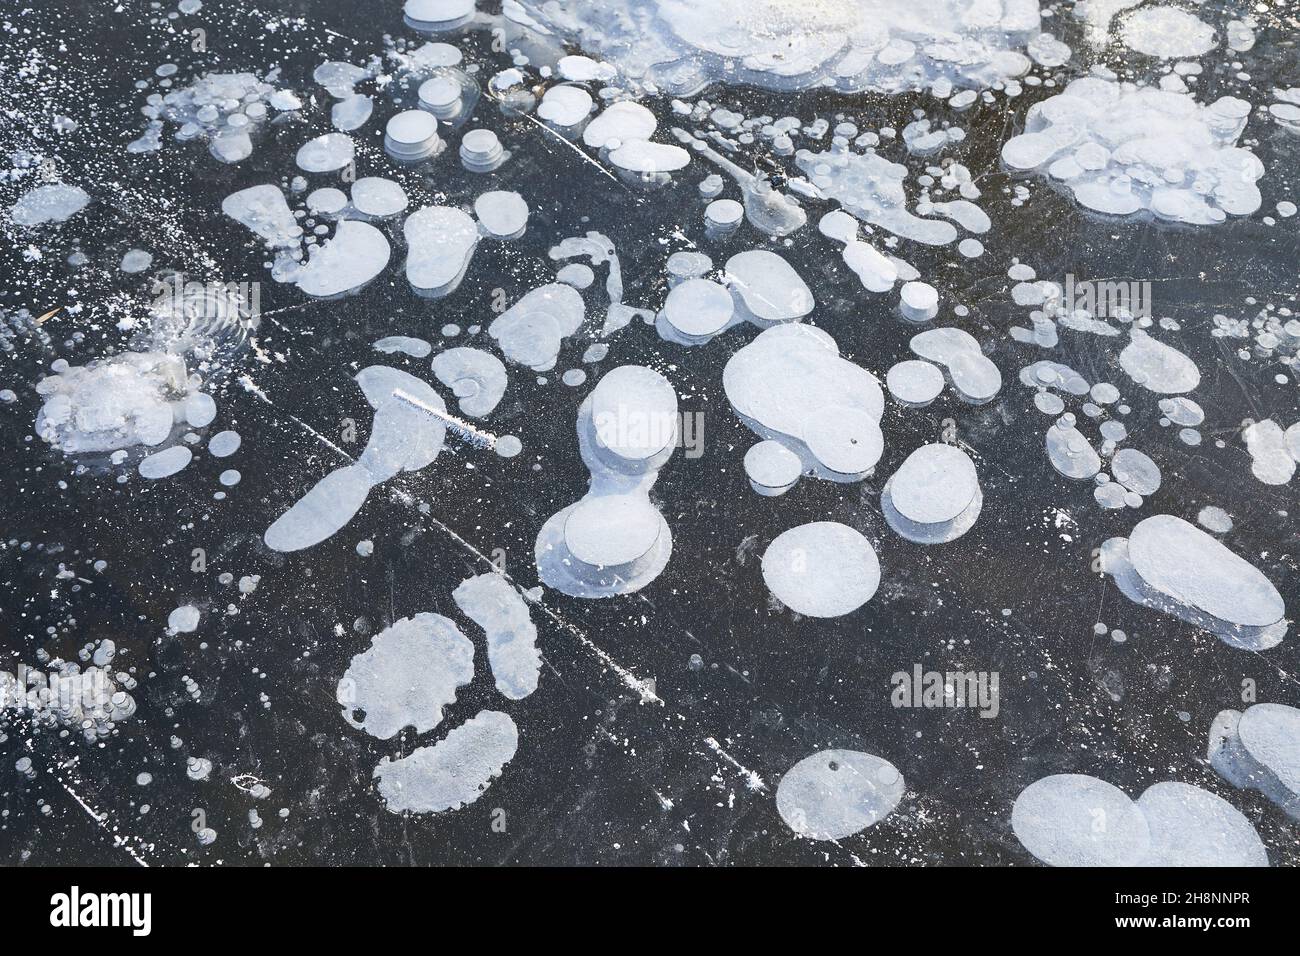 Winter ice with gas bubbles trapped inside Stock Photo